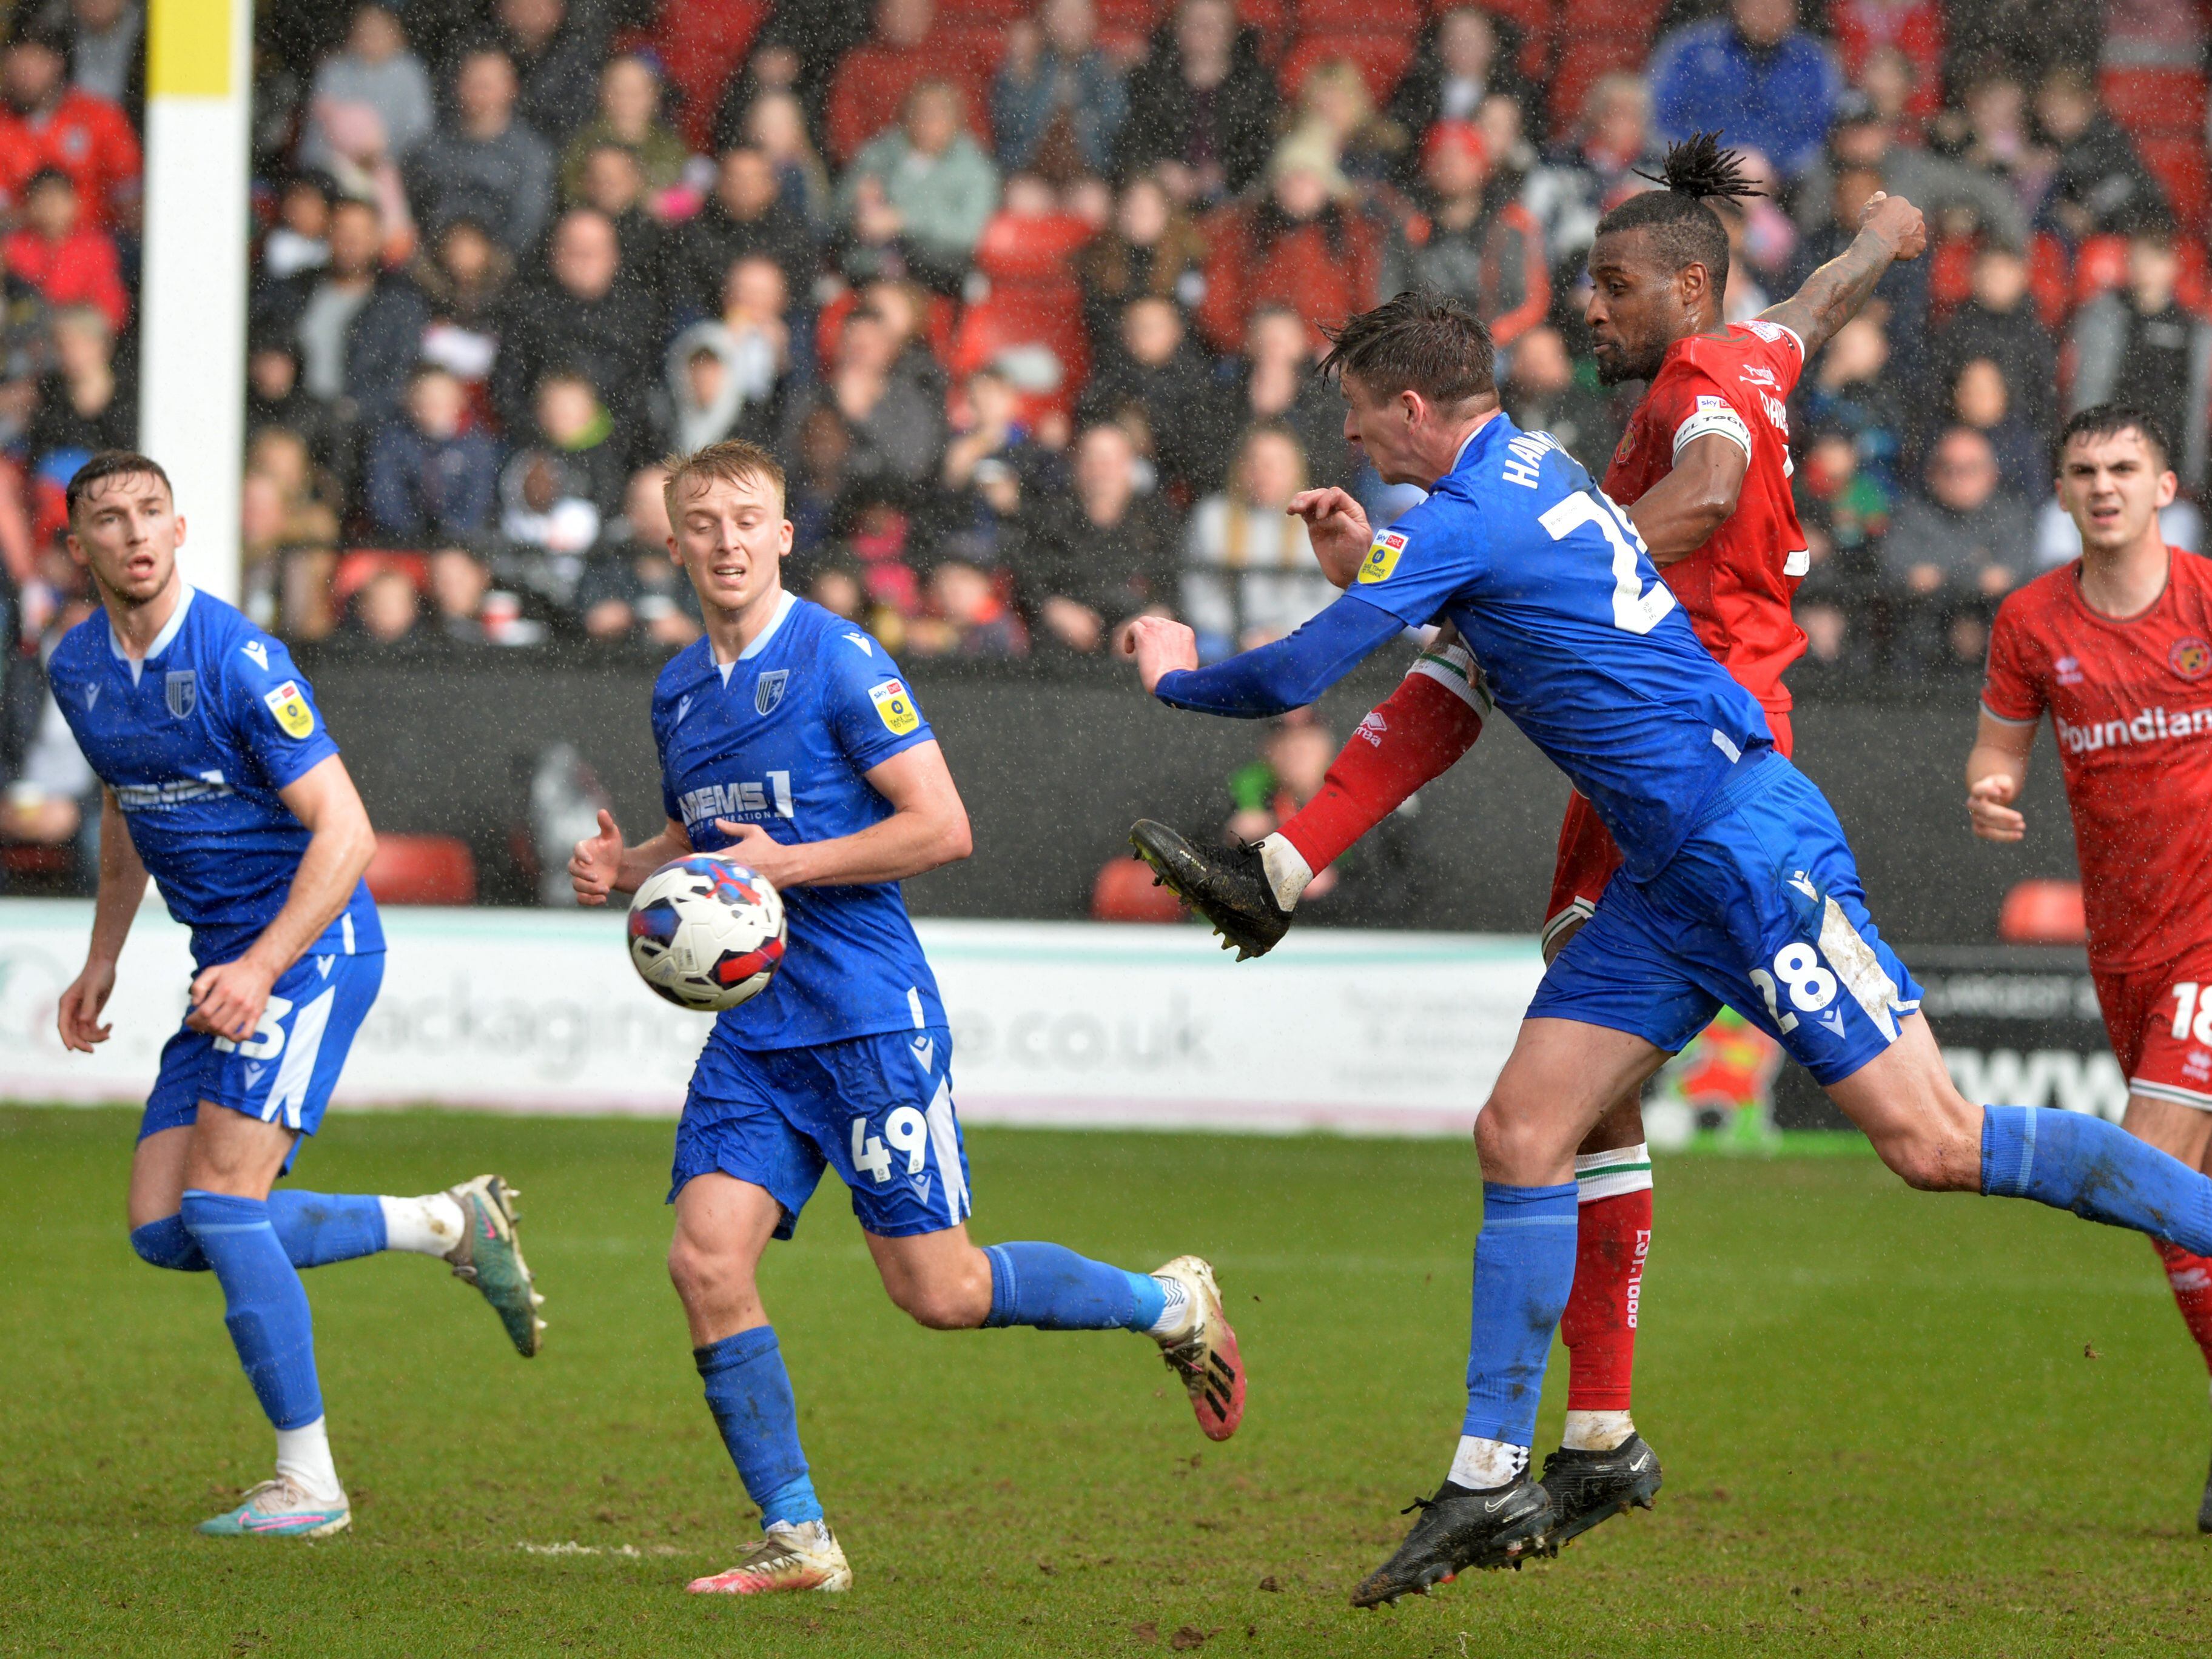 Gillingham bid to climb at Walsall after ruthlessly sacking Neil Harris